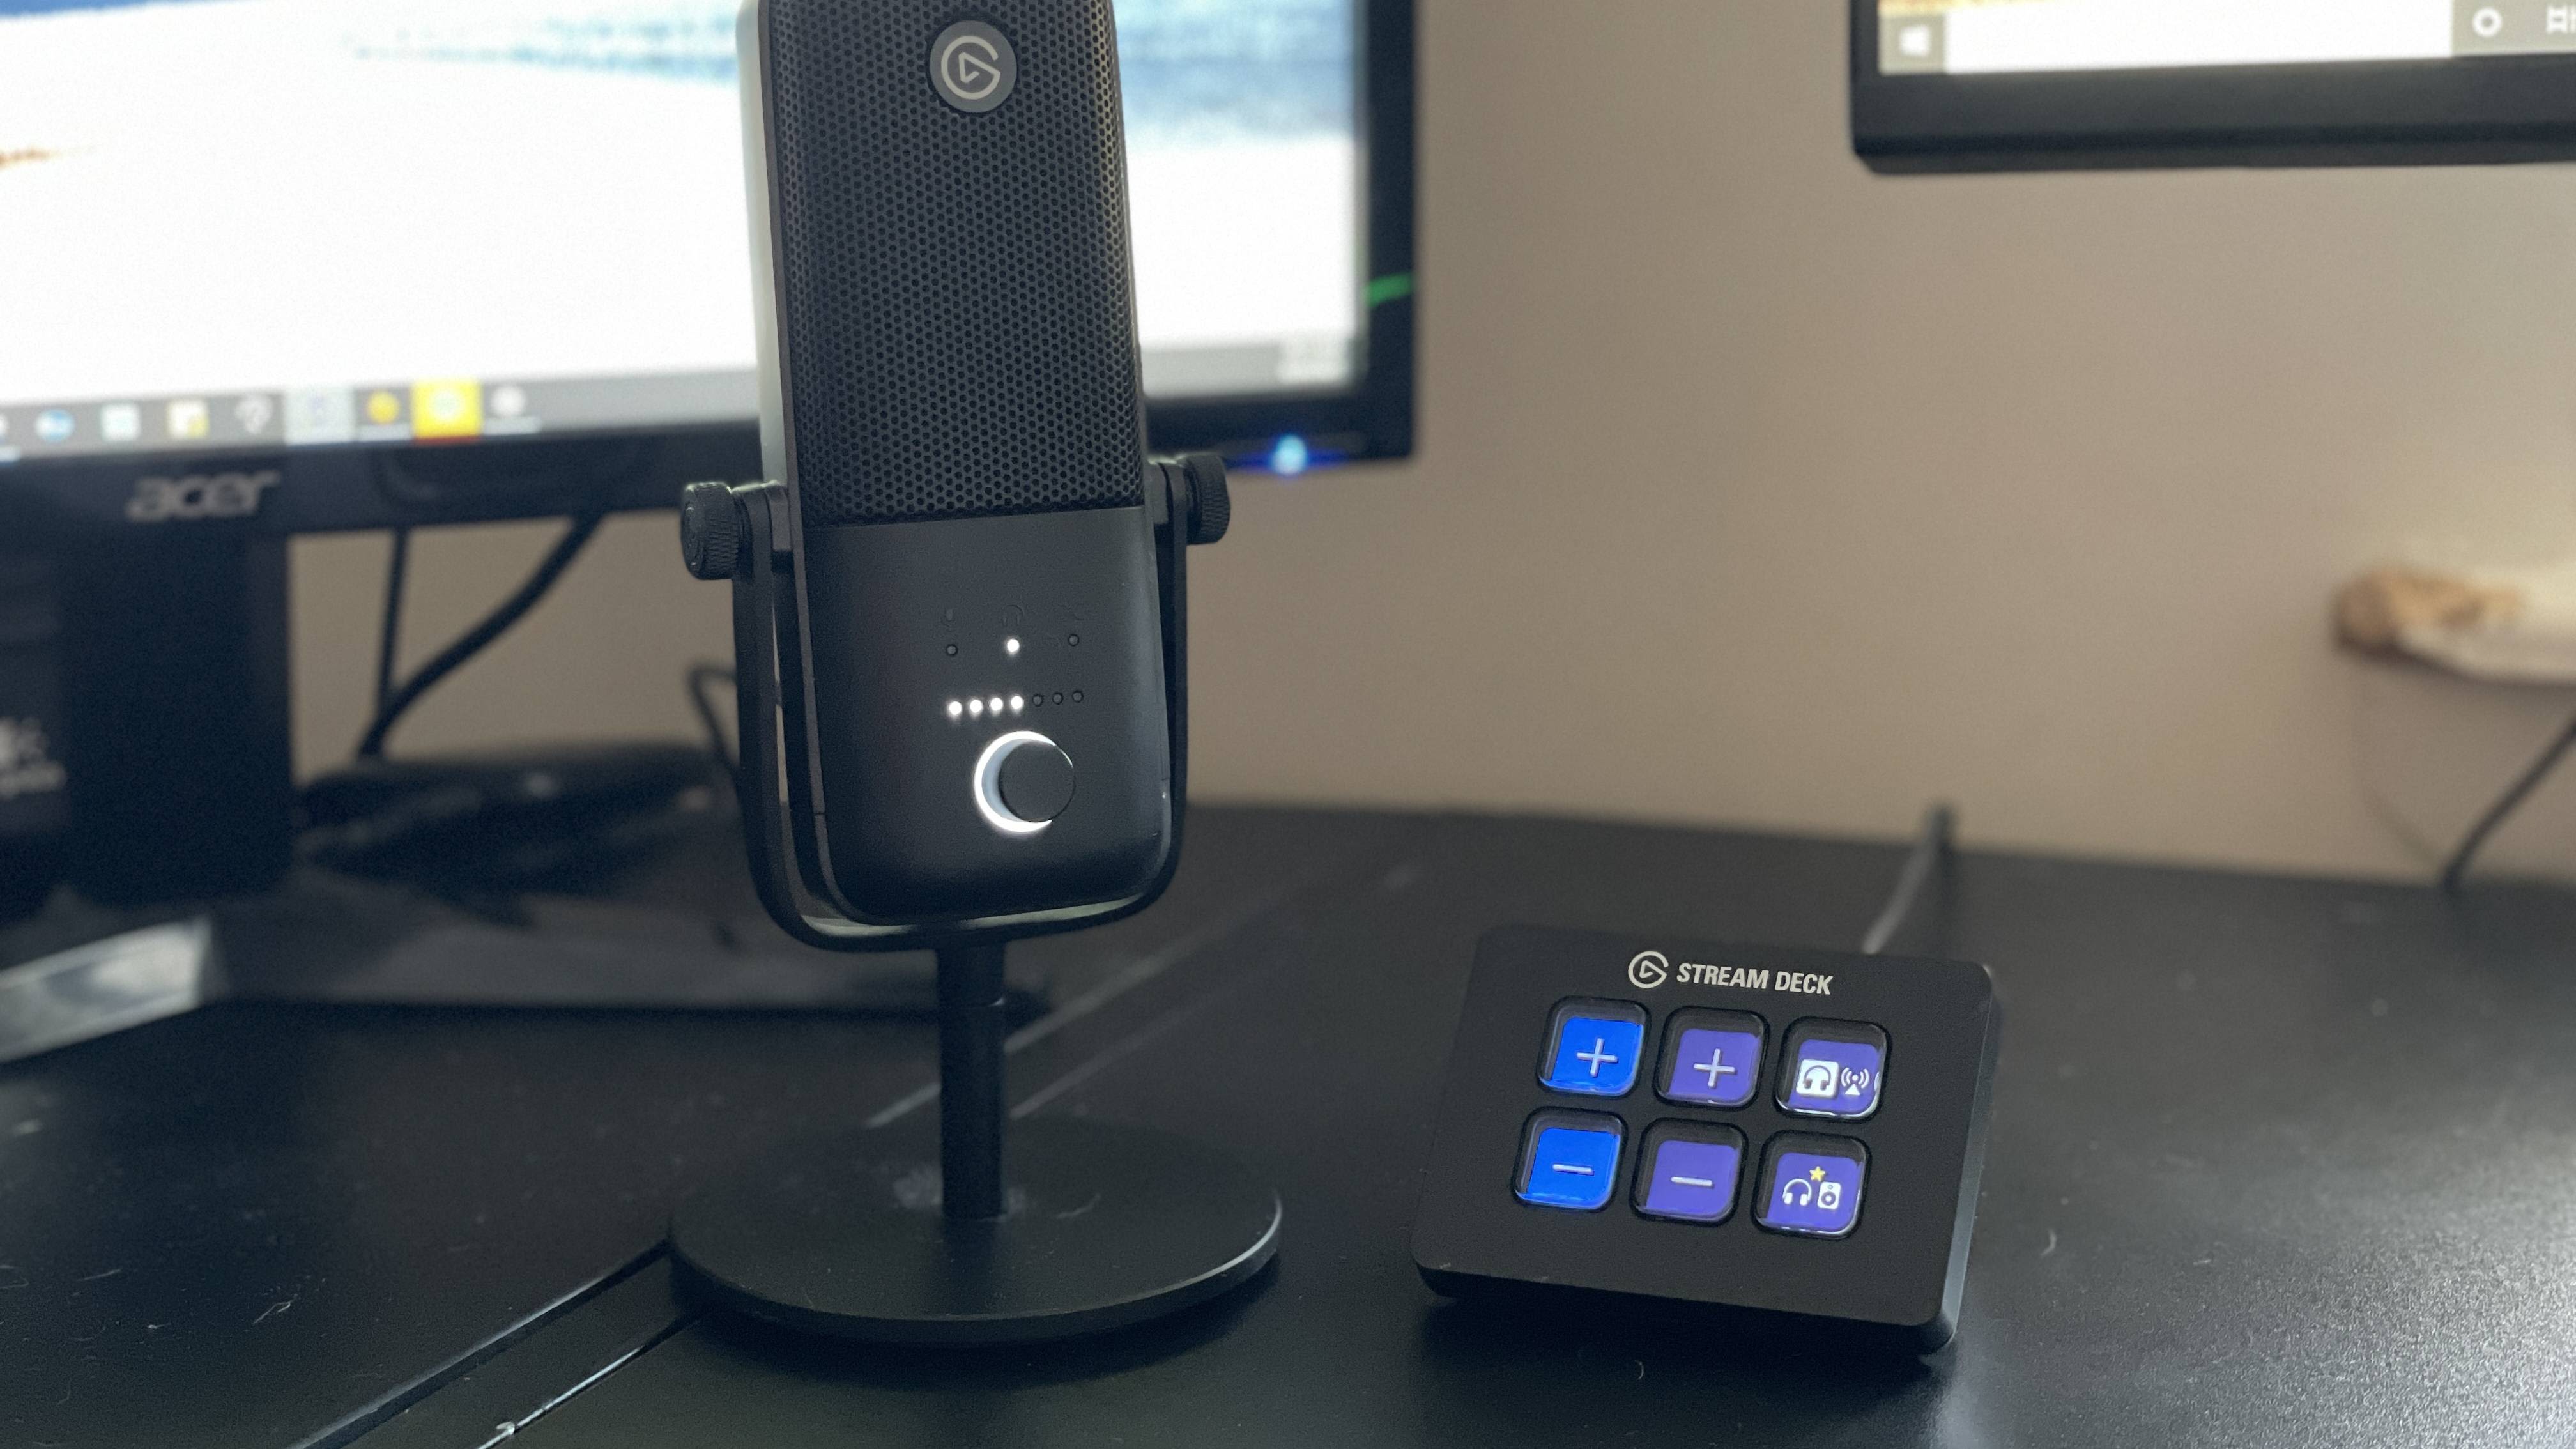 Elevate Your Streams With This Discounted Elgato Control Panel - CNET